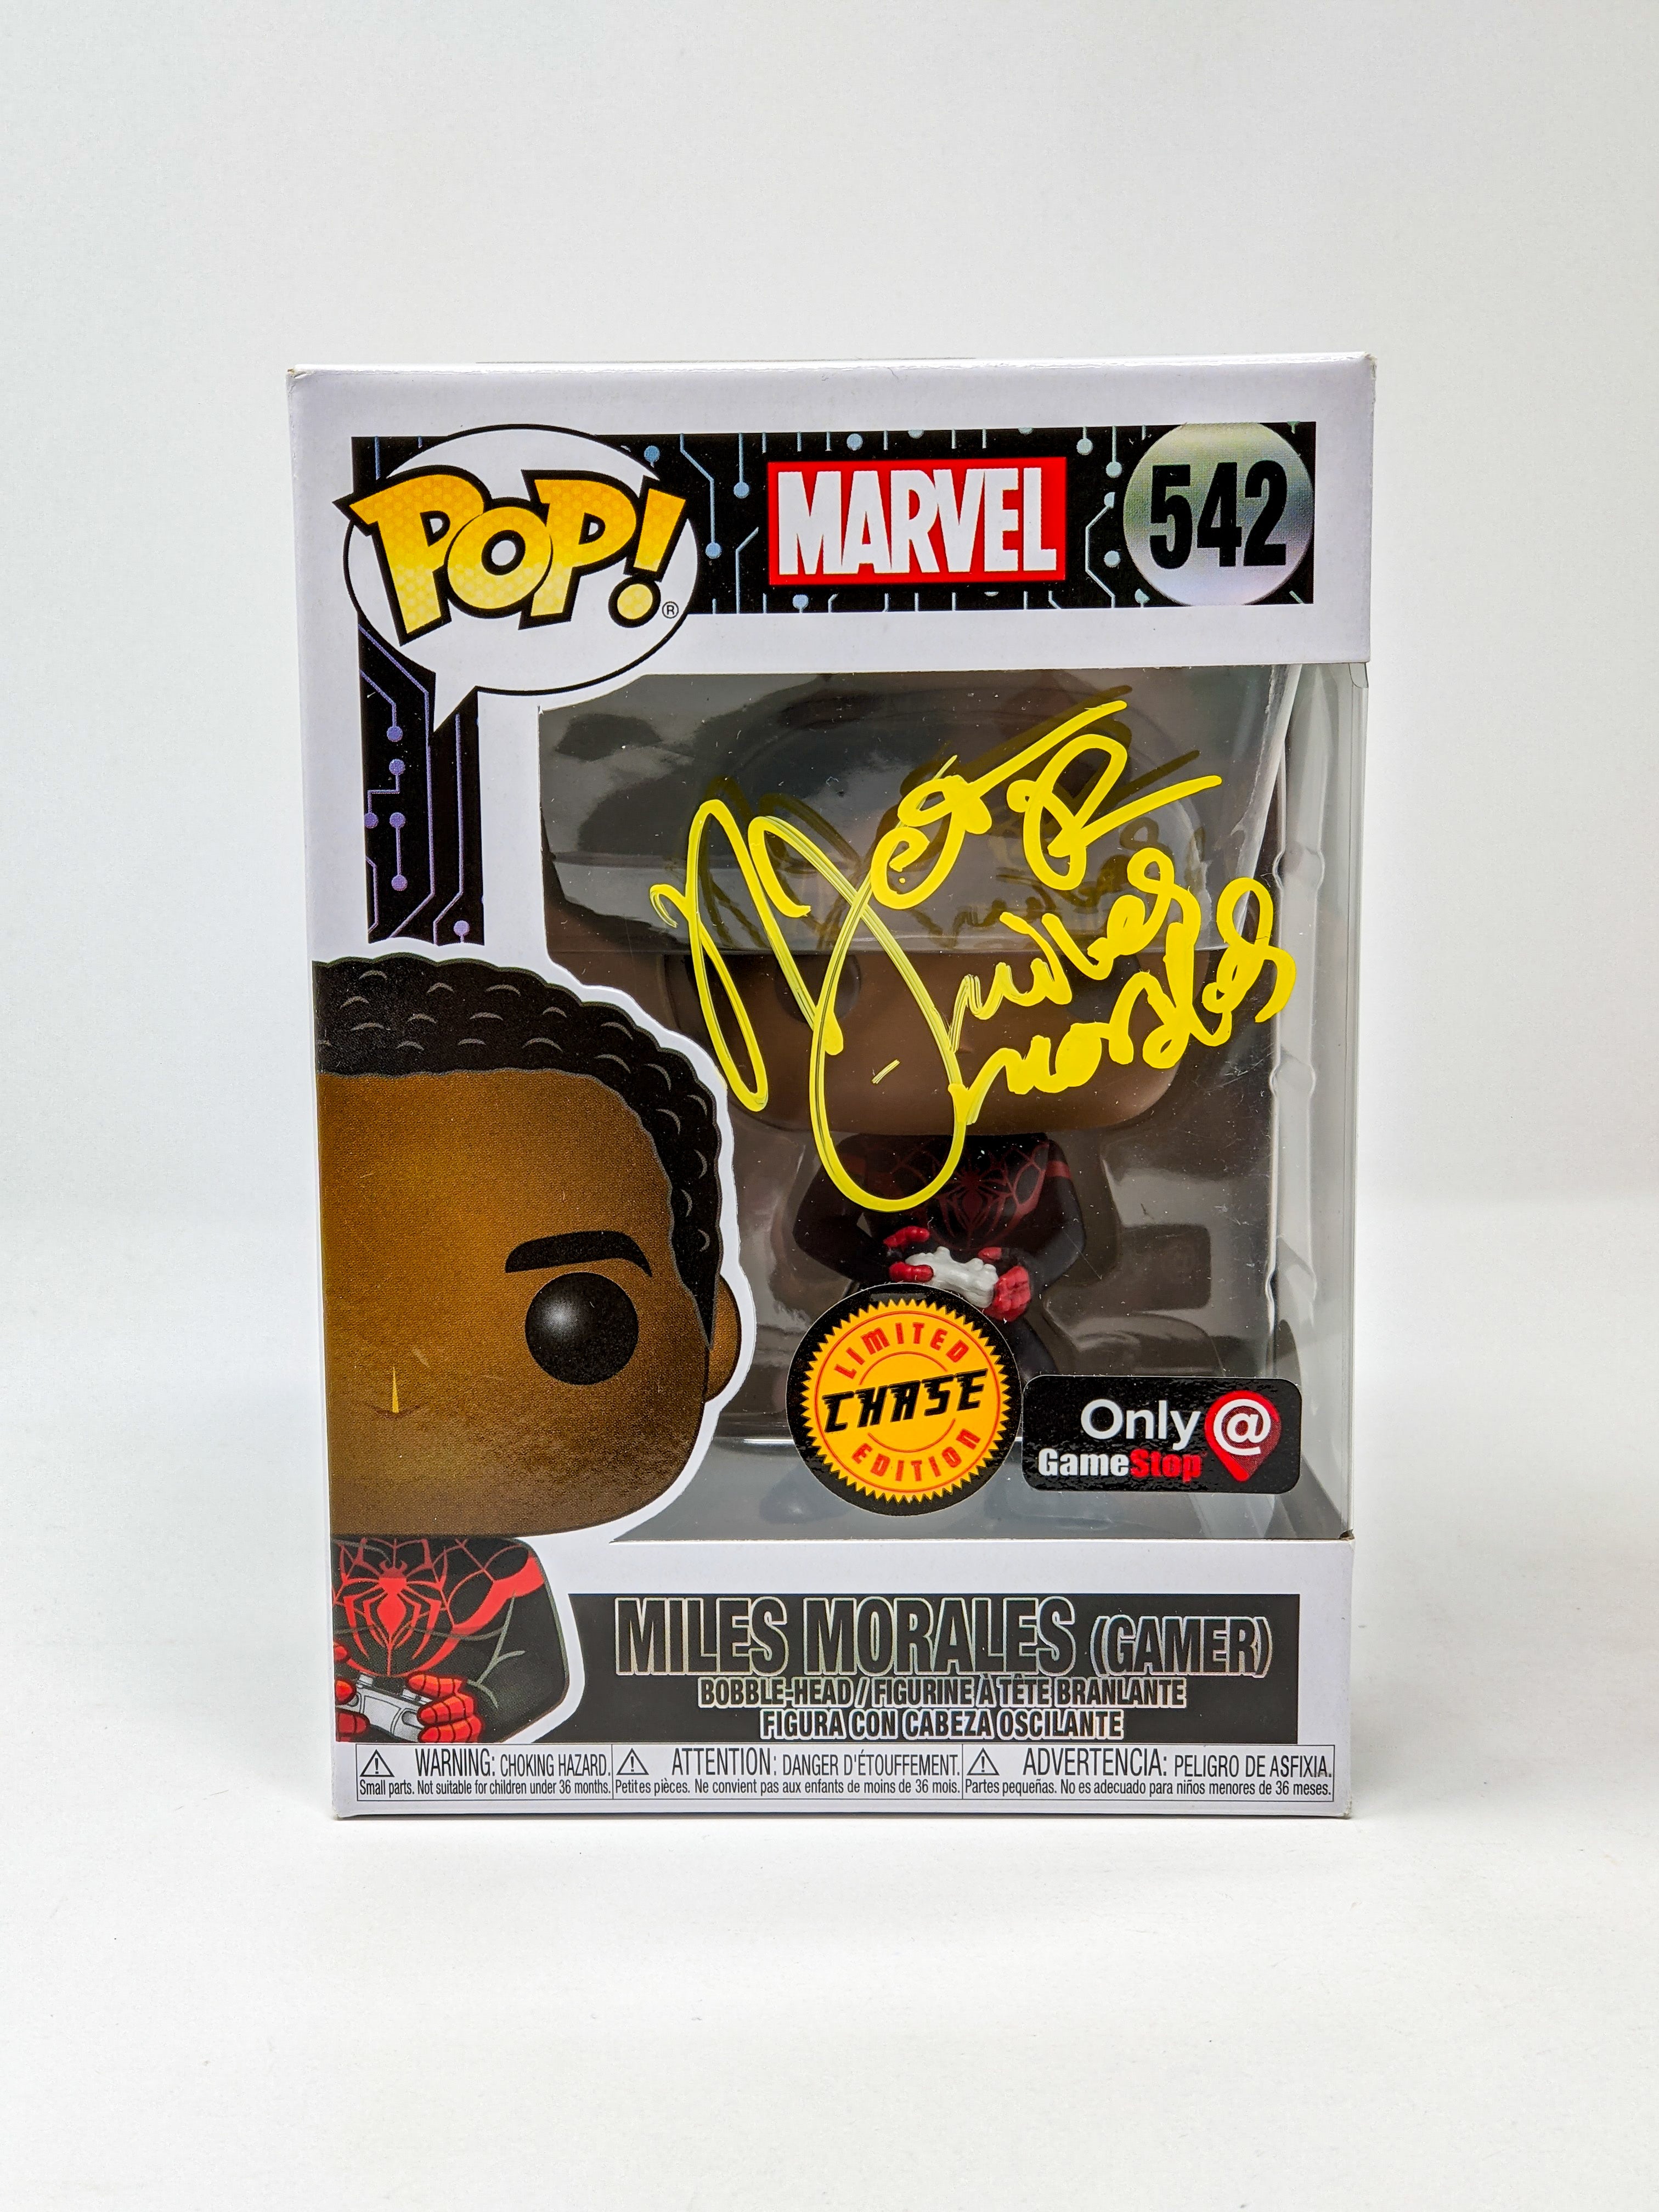 Nadji Jeter Marvel Spiderman Miles Morales (Gamer) Chase Edition #542 Signed Funko Pop JSA Certified Autograph GalaxyCon